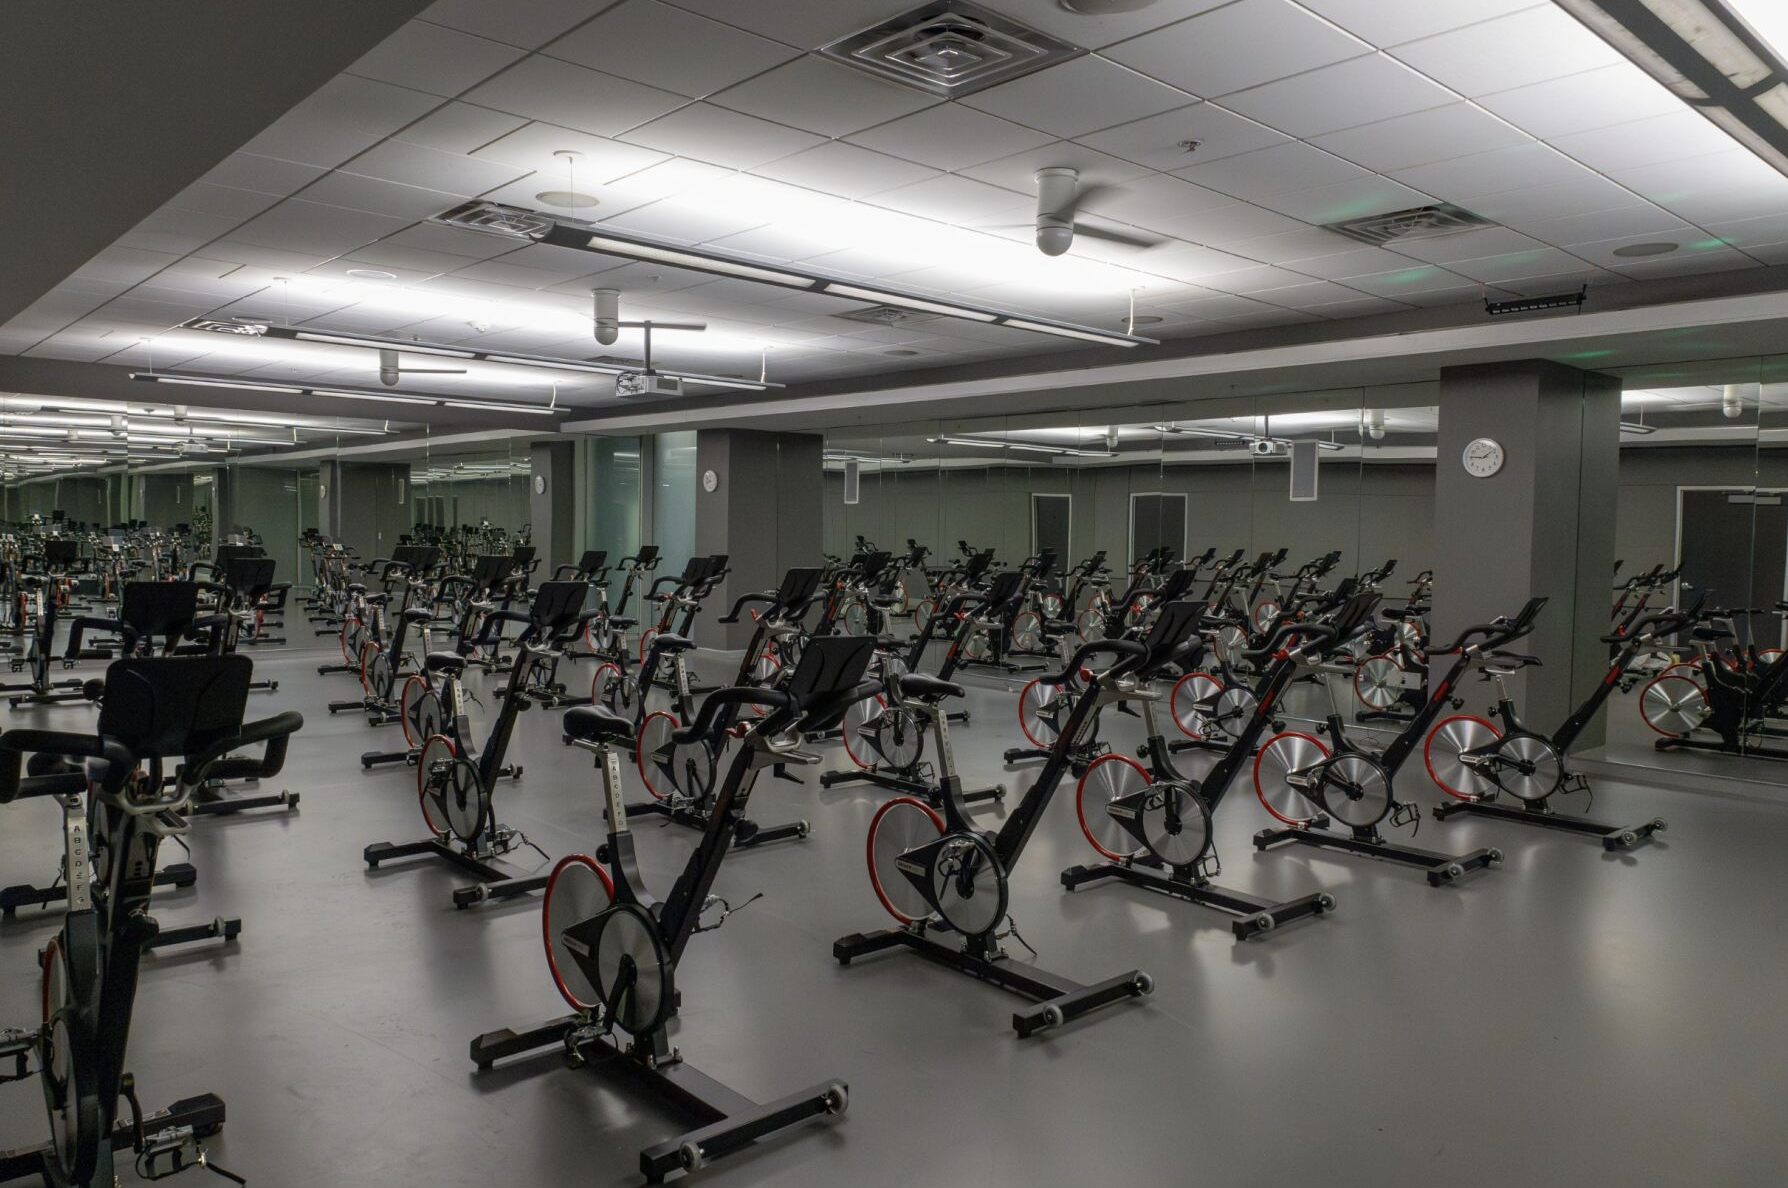 Cycle bikes in the gym.